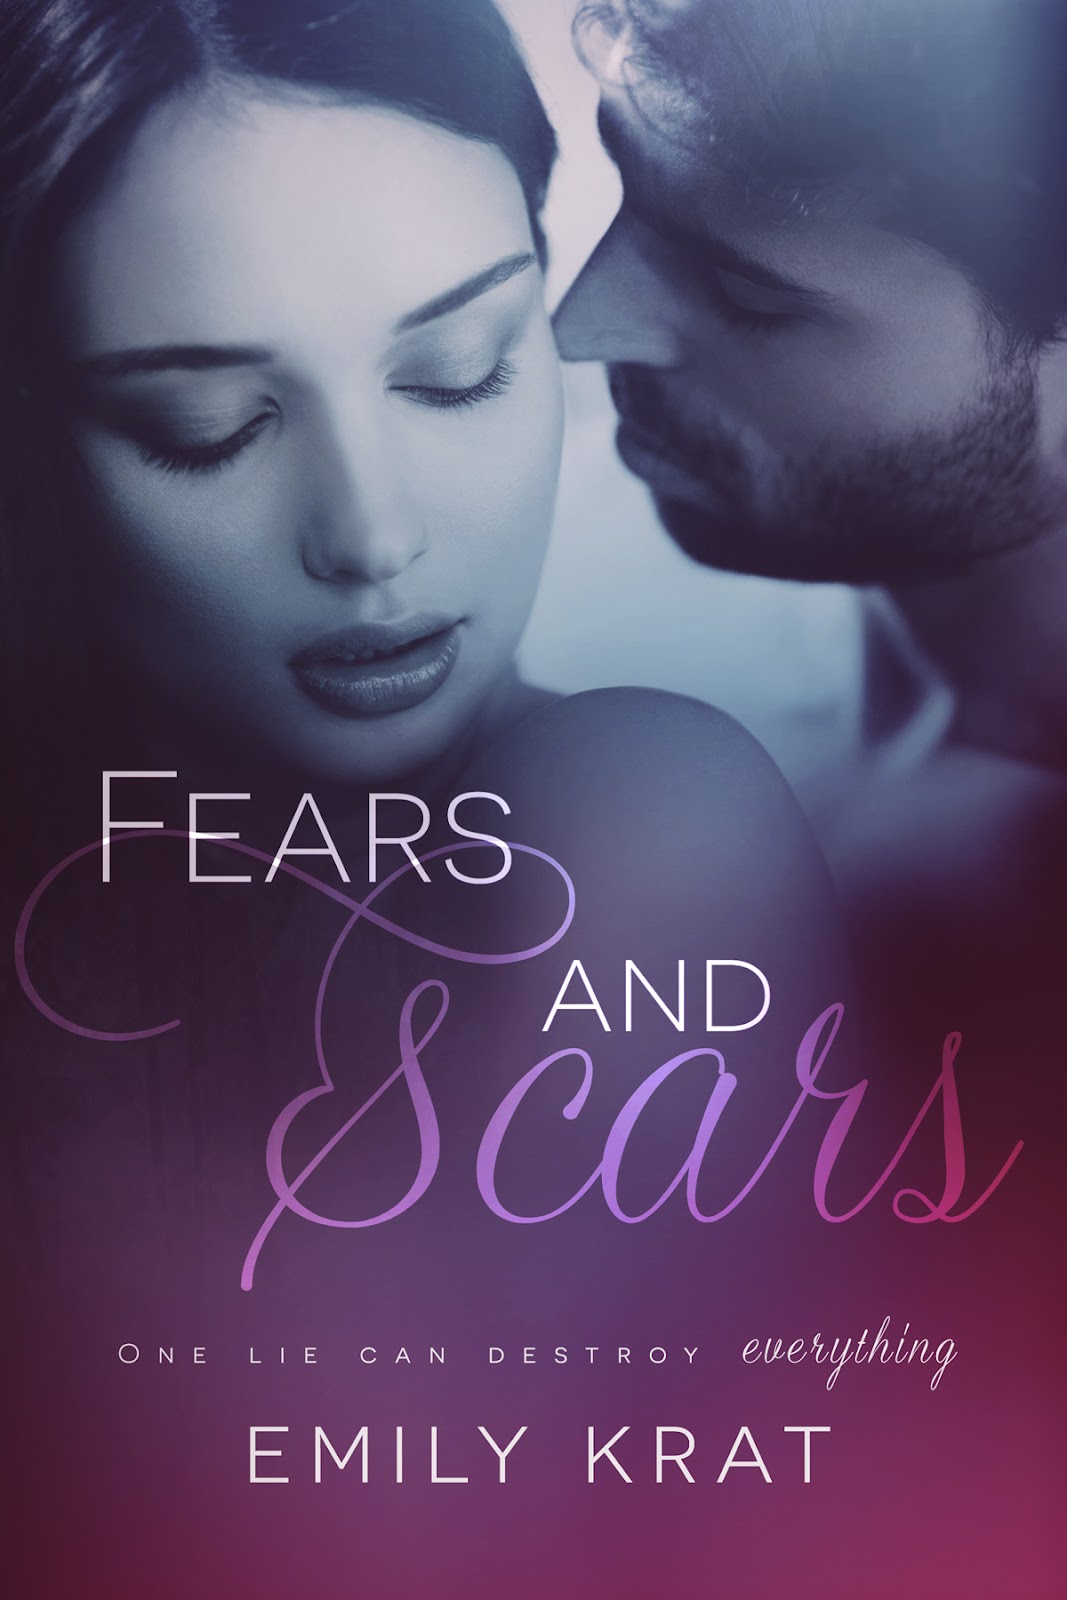 FEARS AND SCARS BY EMILY KRAT EBOOK COVER.jpg